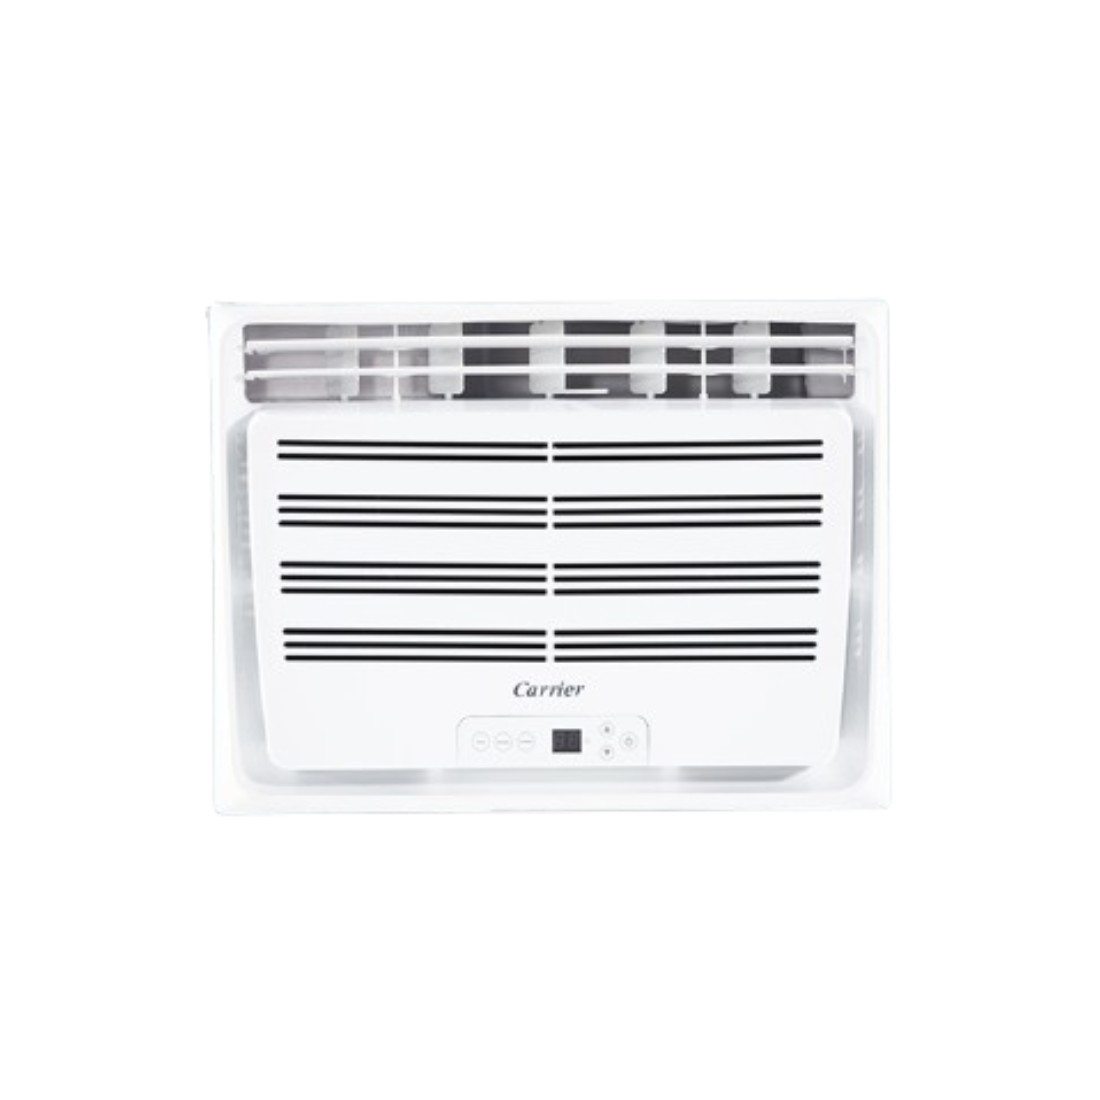 Carrier 0.50 HP Remote ICool Green Window-Type Air Conditioner (Class A)